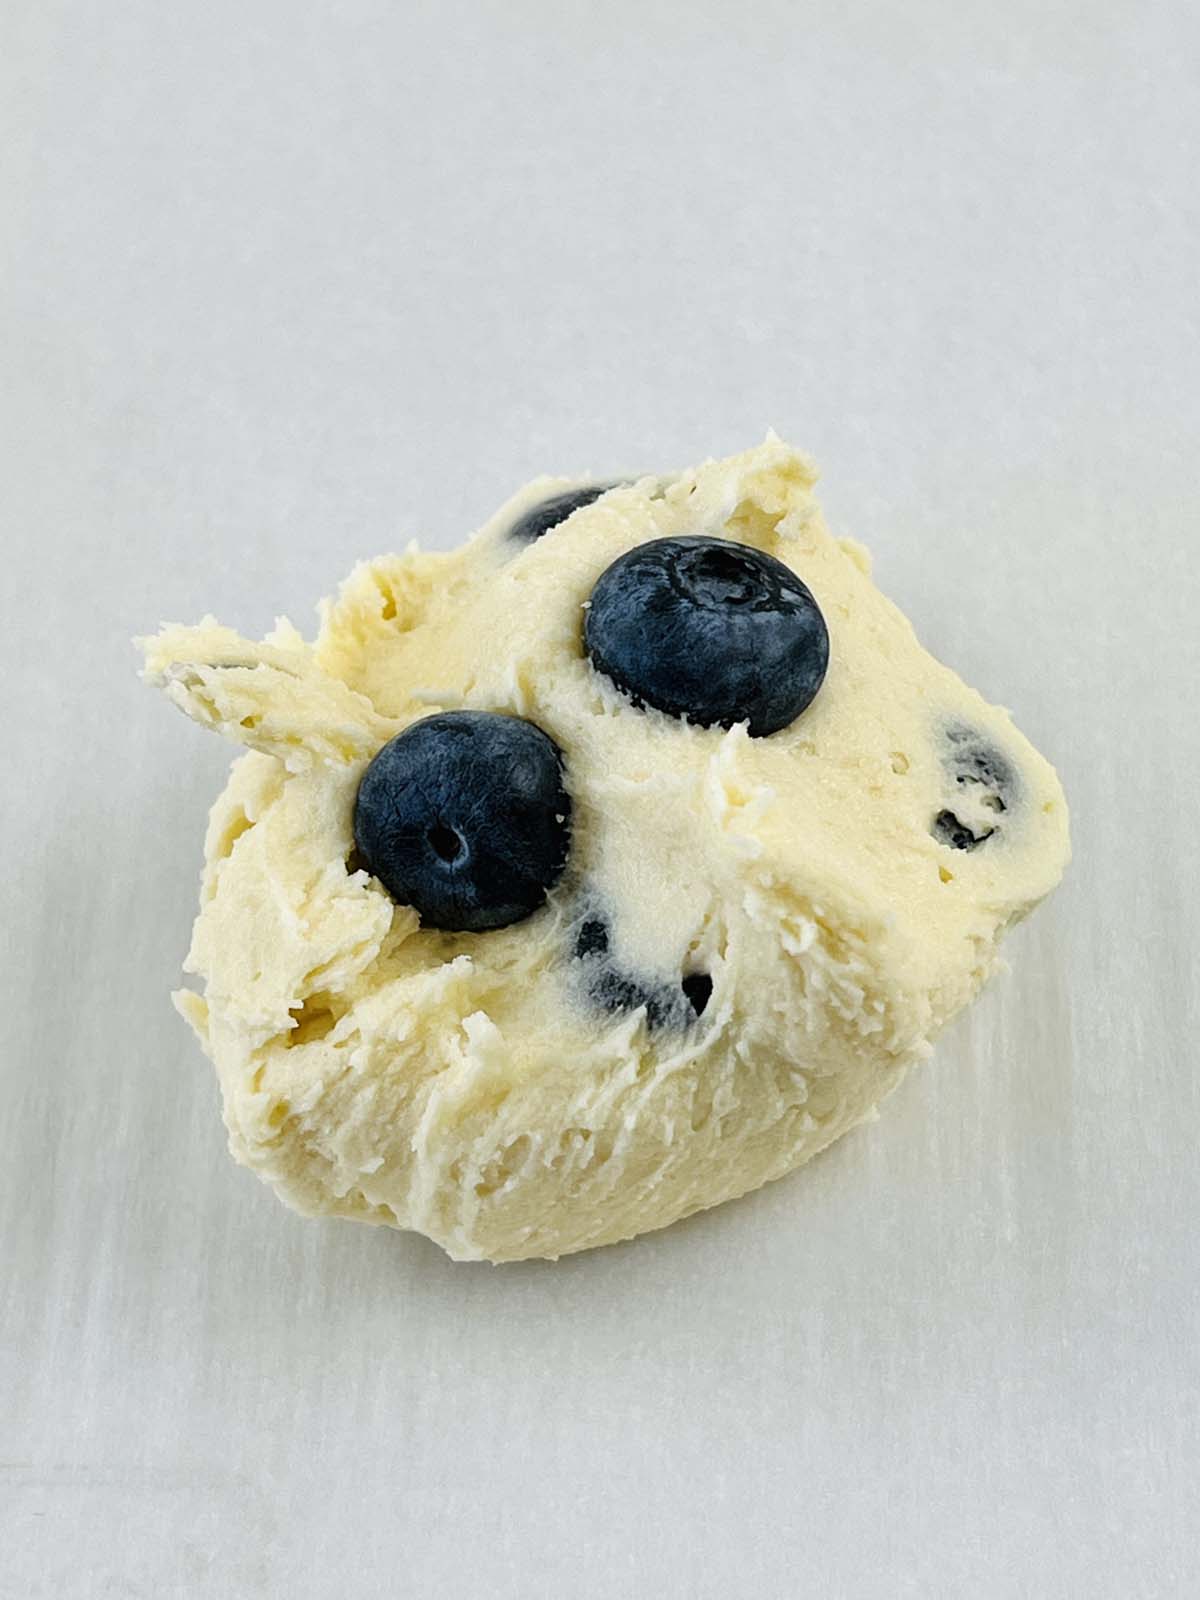 A scoop of cookie dough with blueberries on top.